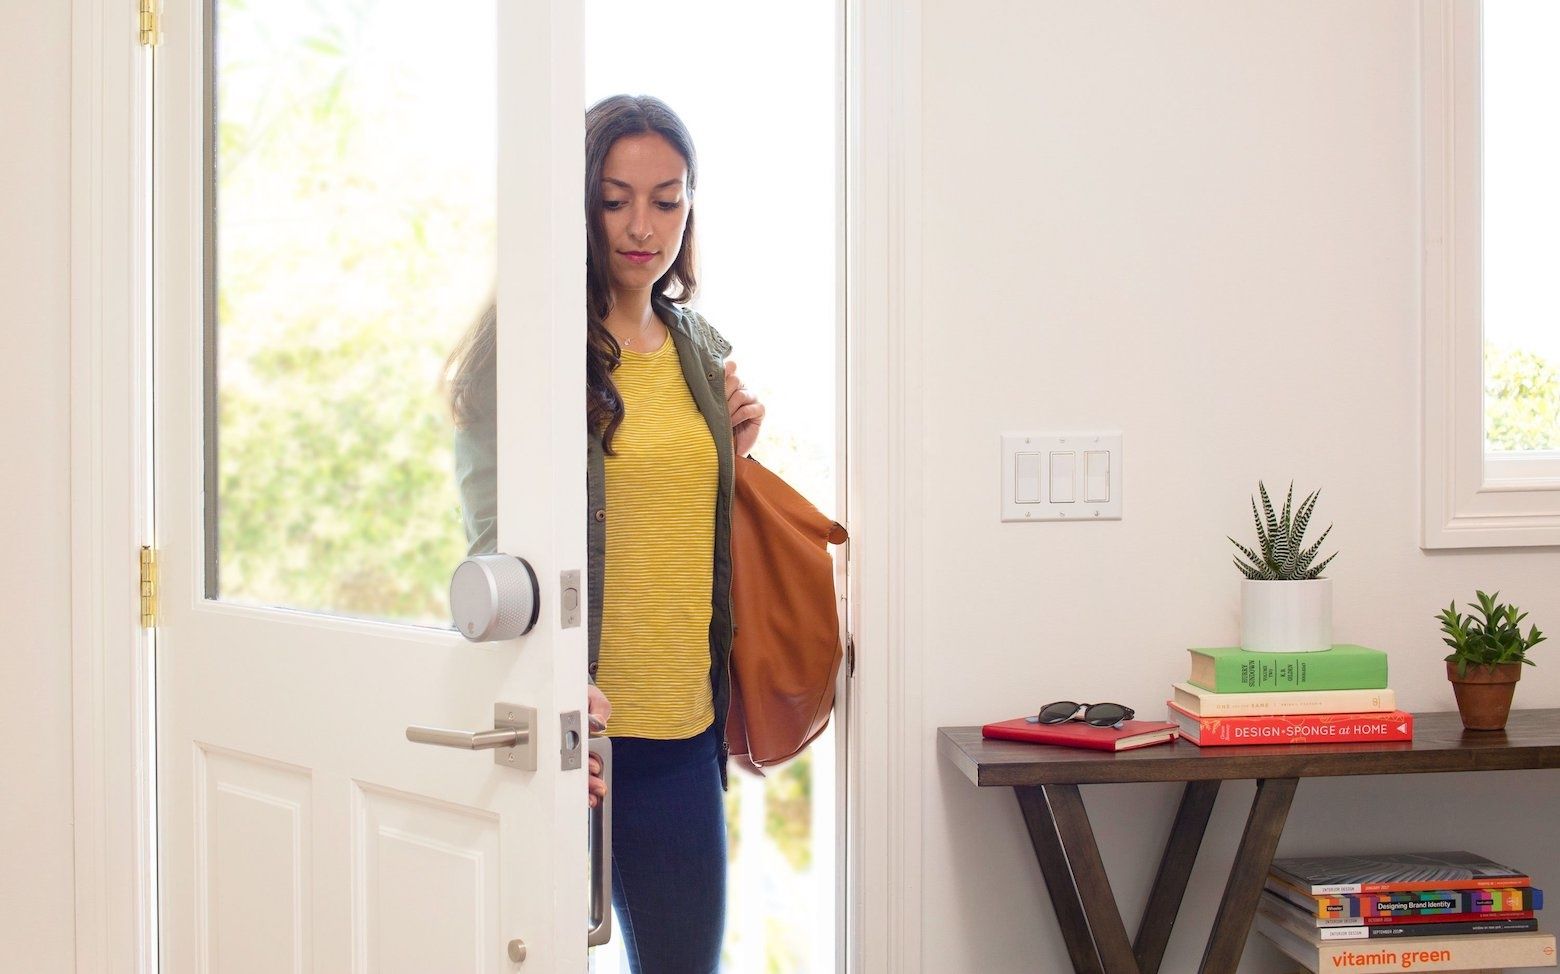 A woman walking into a home with a Yale smart lock on the door